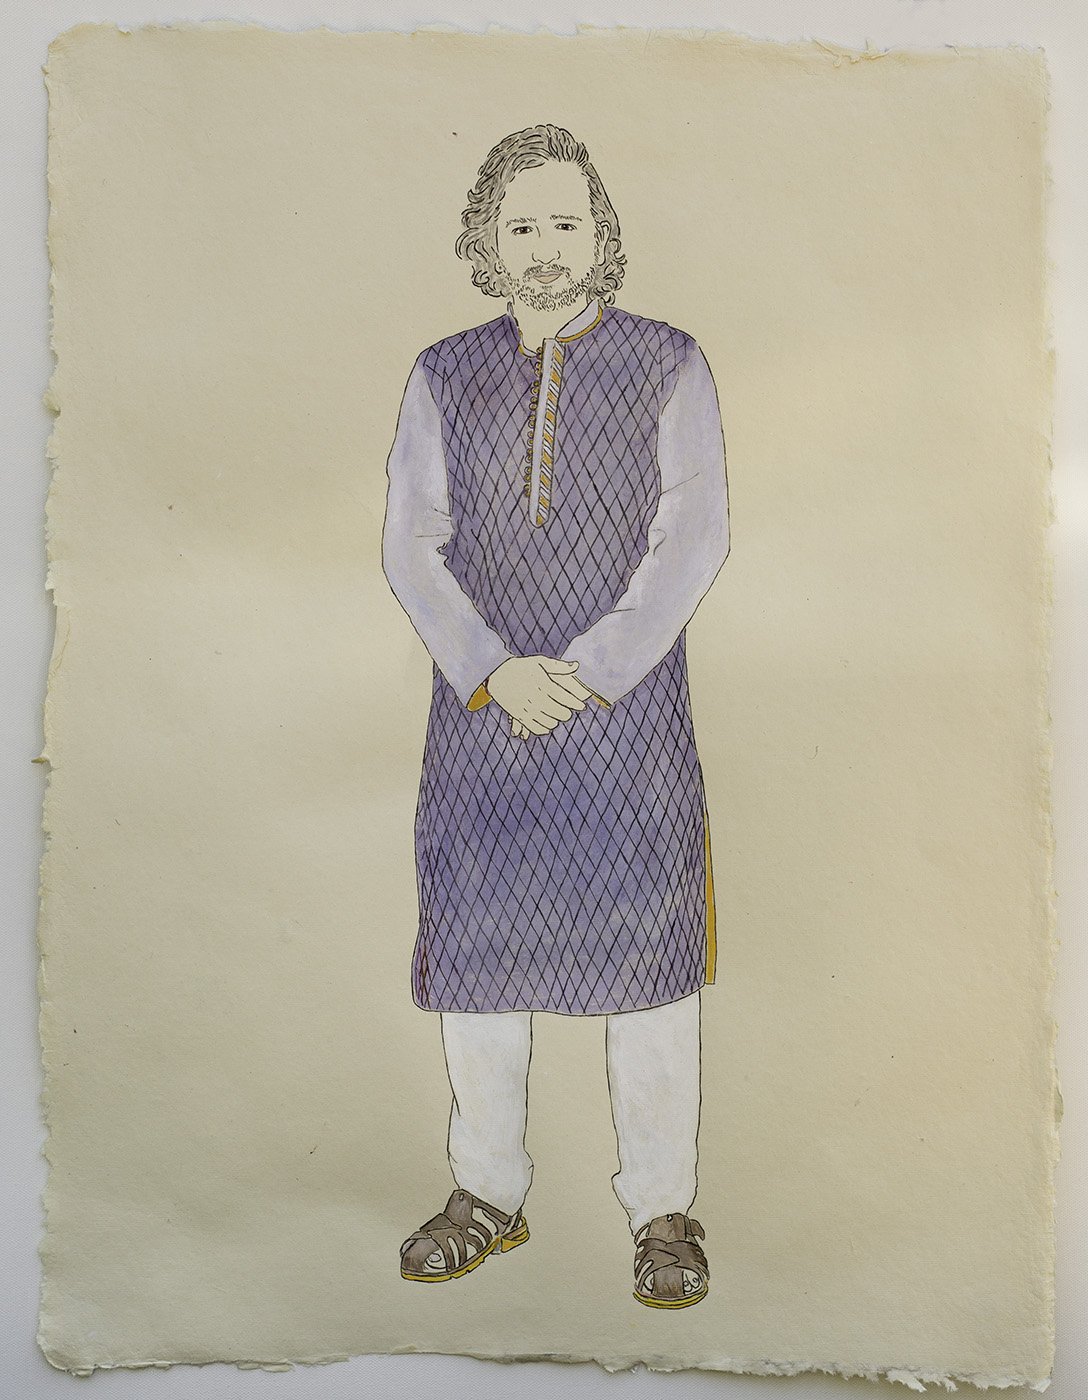   Available    Man in Traditional Indian Garb   2021, ink, watercolor, and gouache on handmade paper, 25” x 19” 